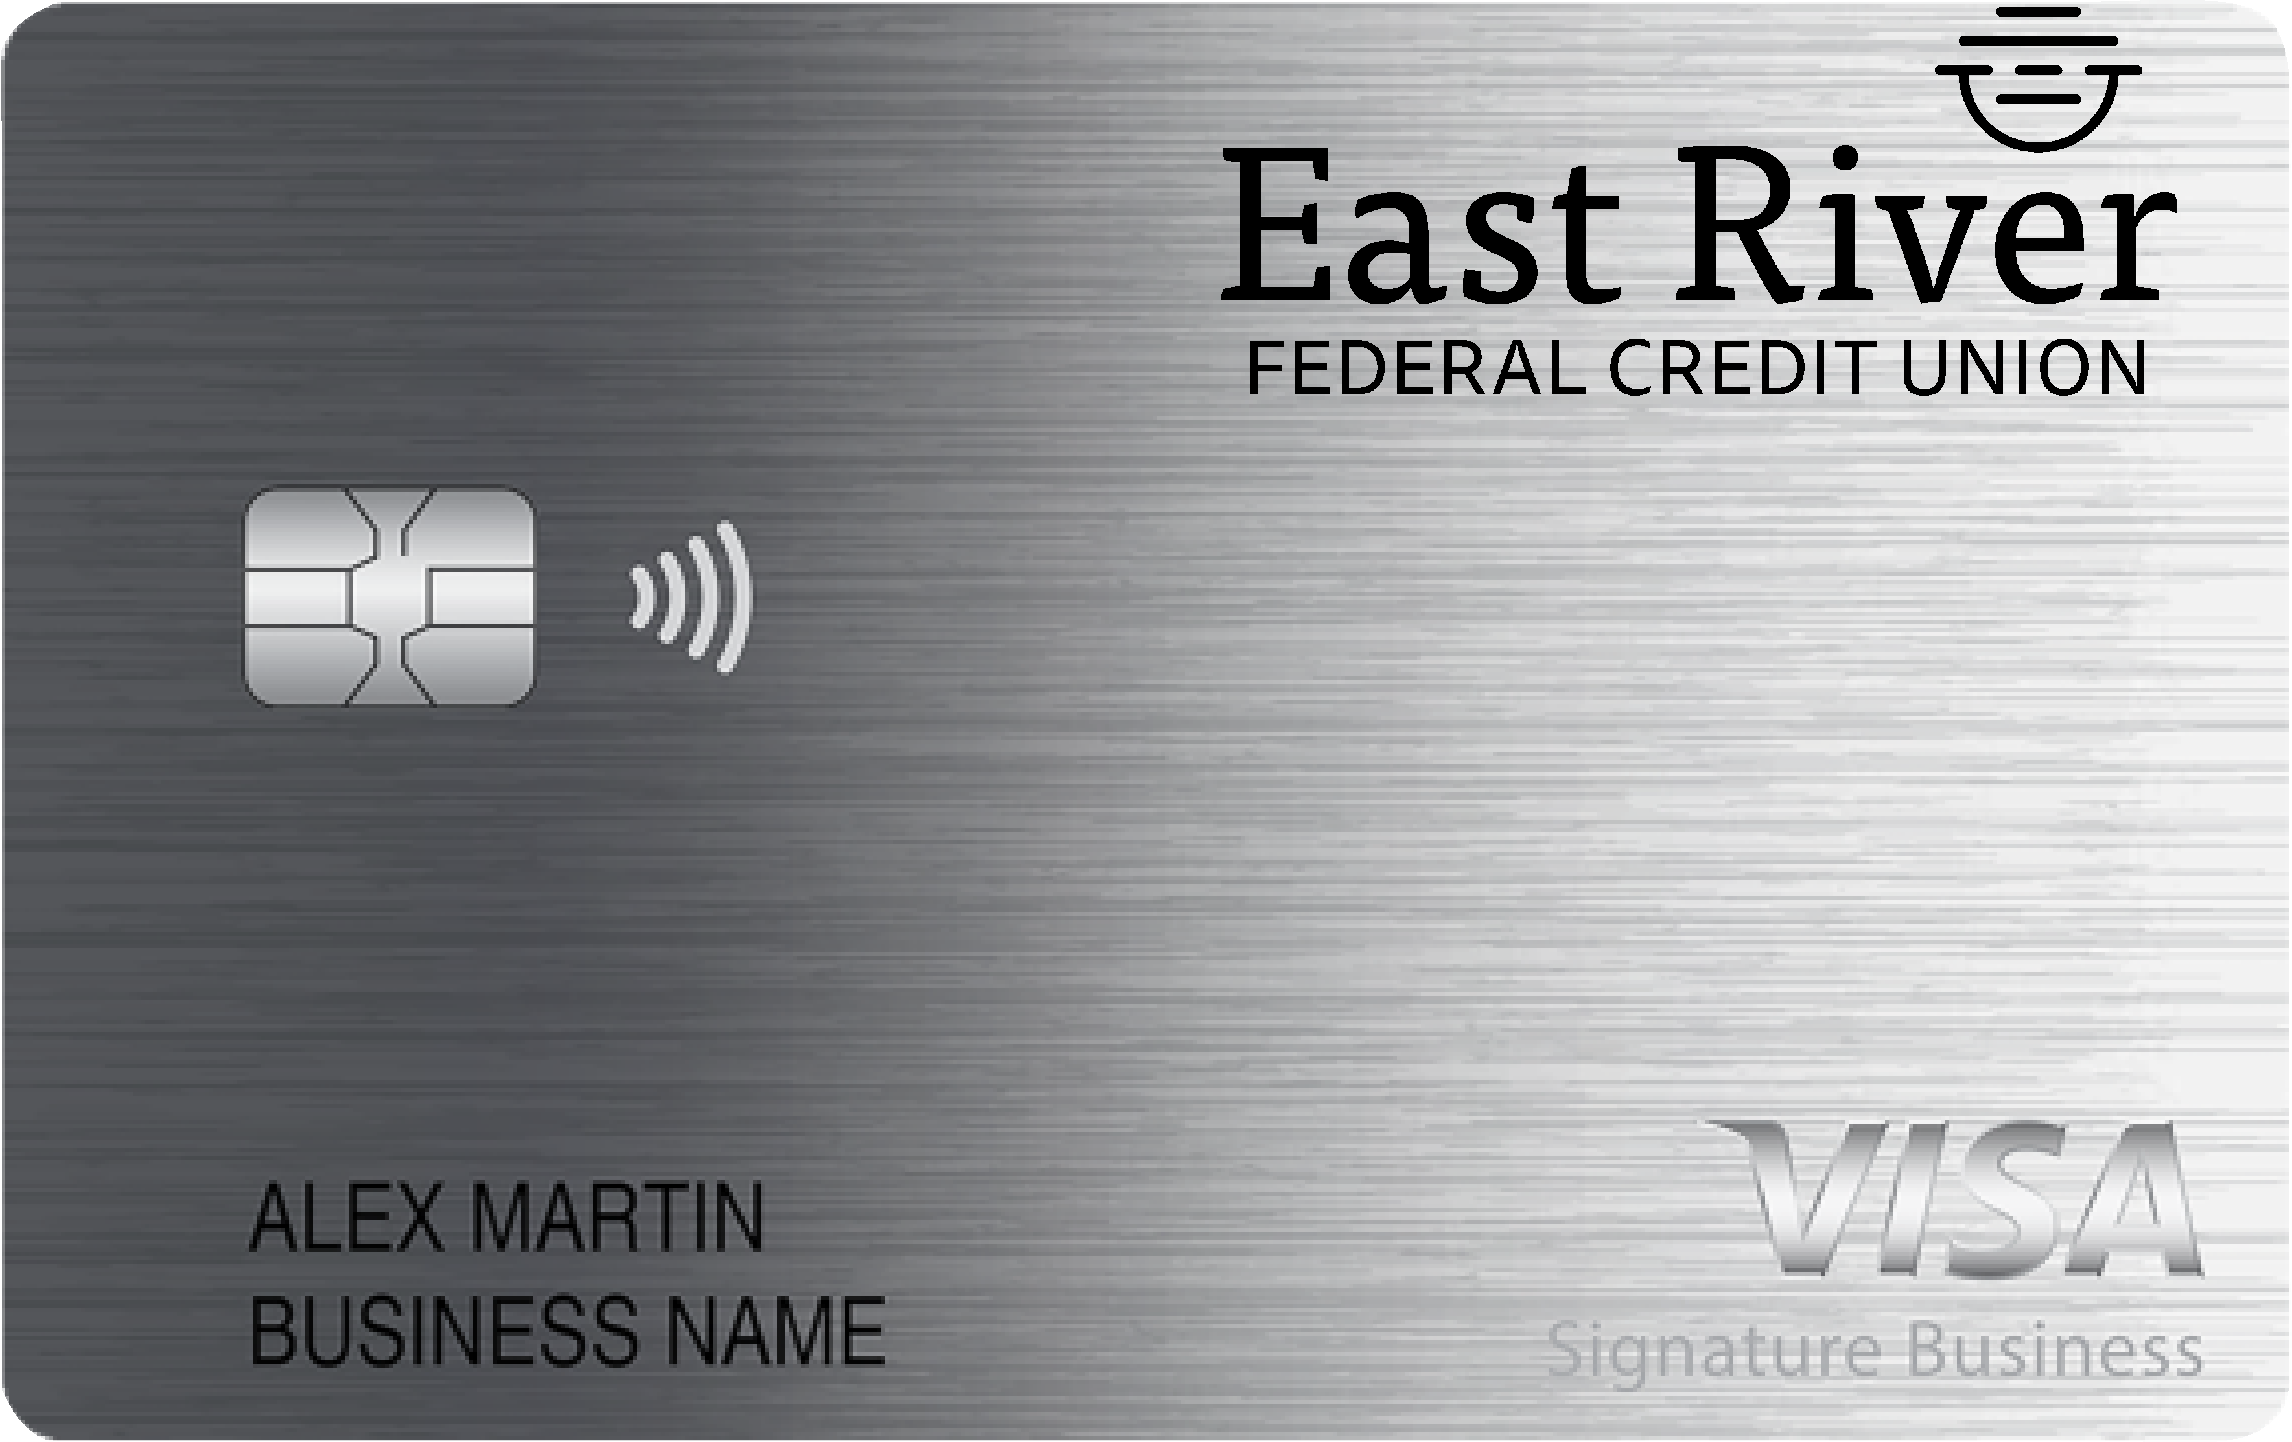 East River Federal Credit Union